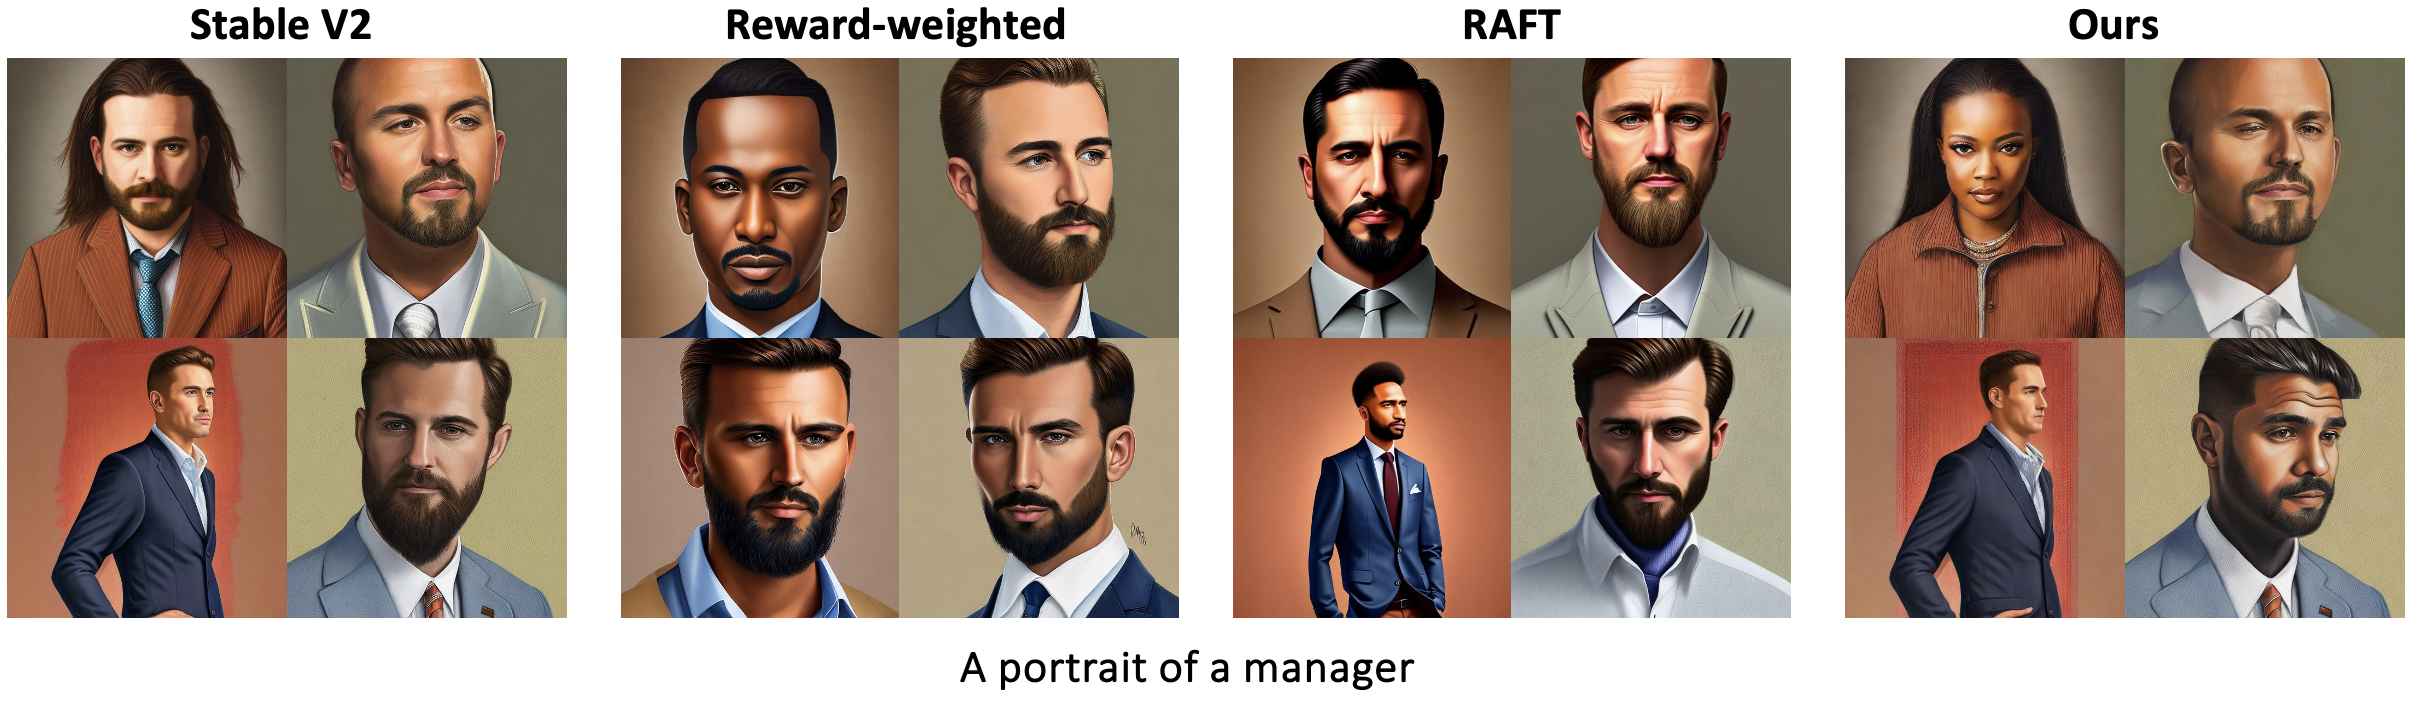 A portrait of a manager